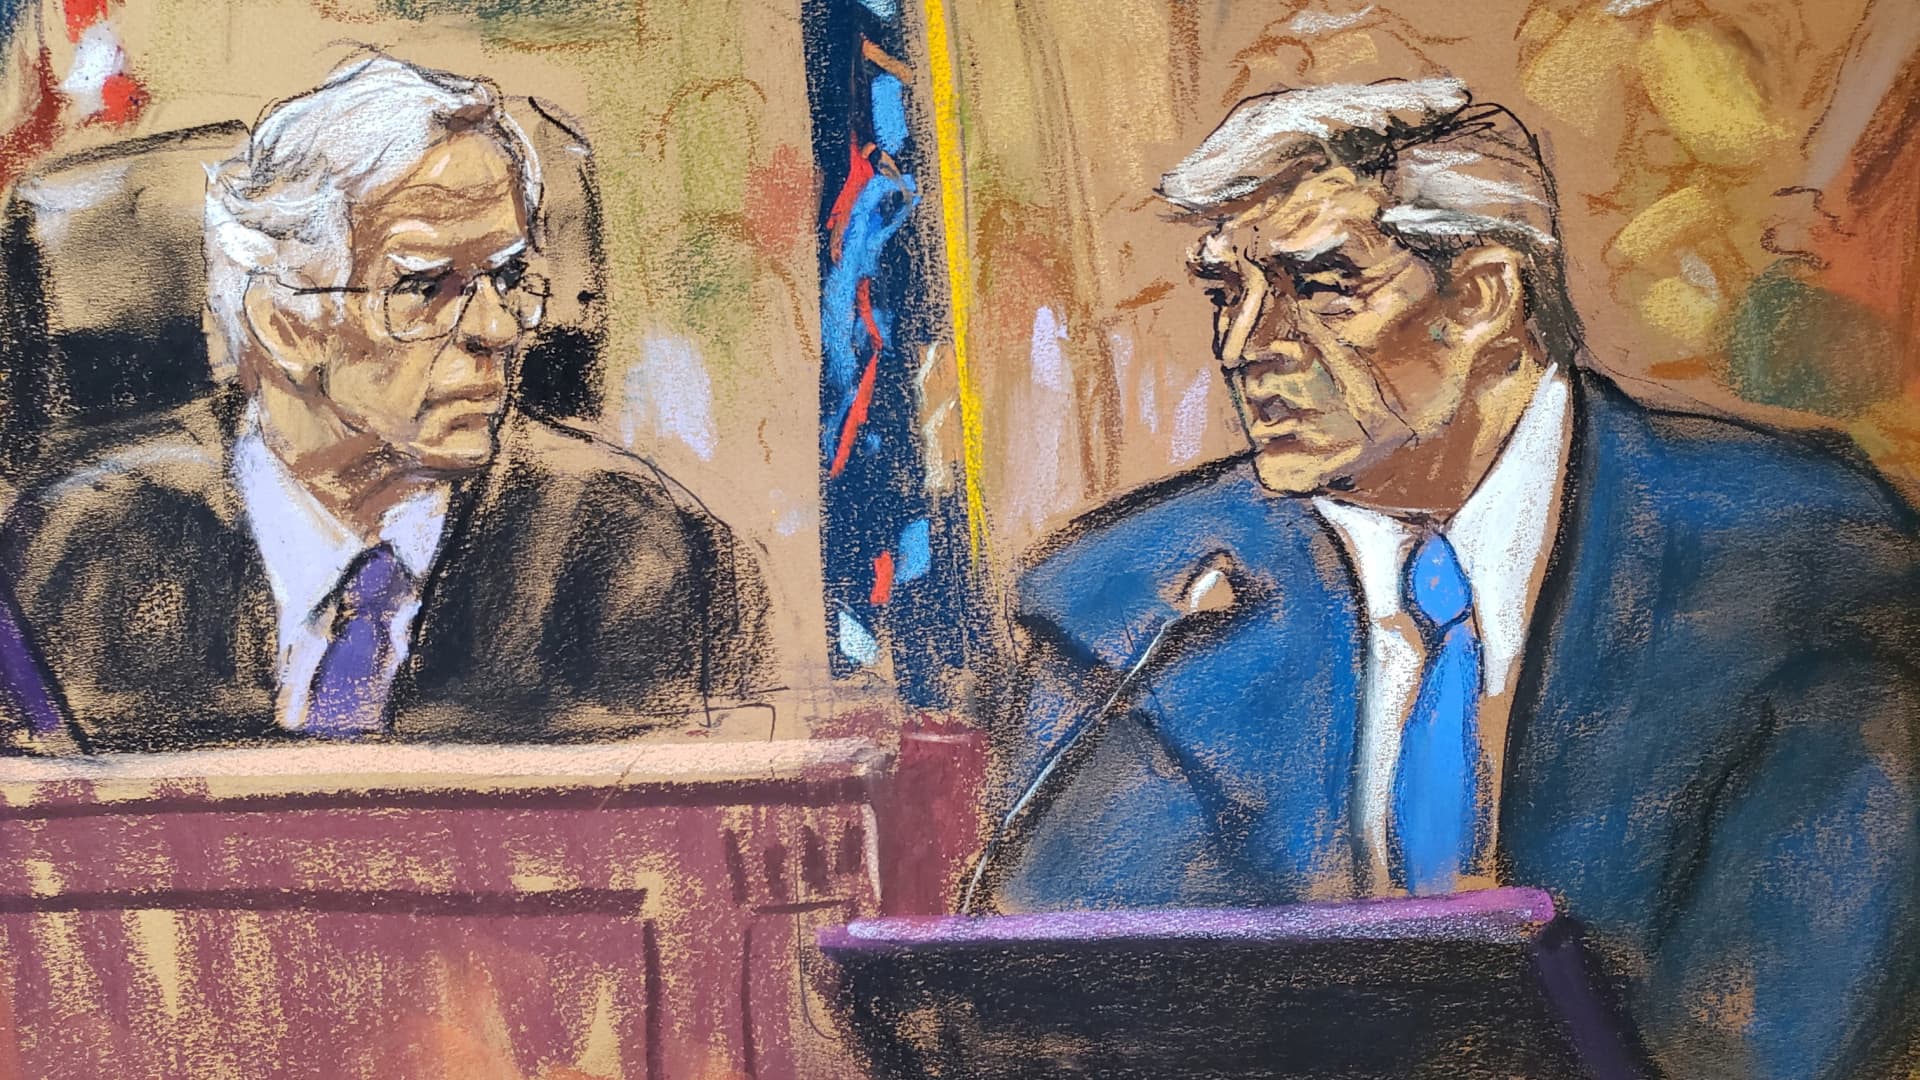 Former U.S. President Donald Trump is questioned by Judge Arthur F. Engoron before being fined $10,000 for violating a gag order for a second time, during the Trump Organization civil fraud trial in New York State Supreme Court in the Manhattan borough of New York City, U.S., October 25, 2023 in this courtroom sketch. 